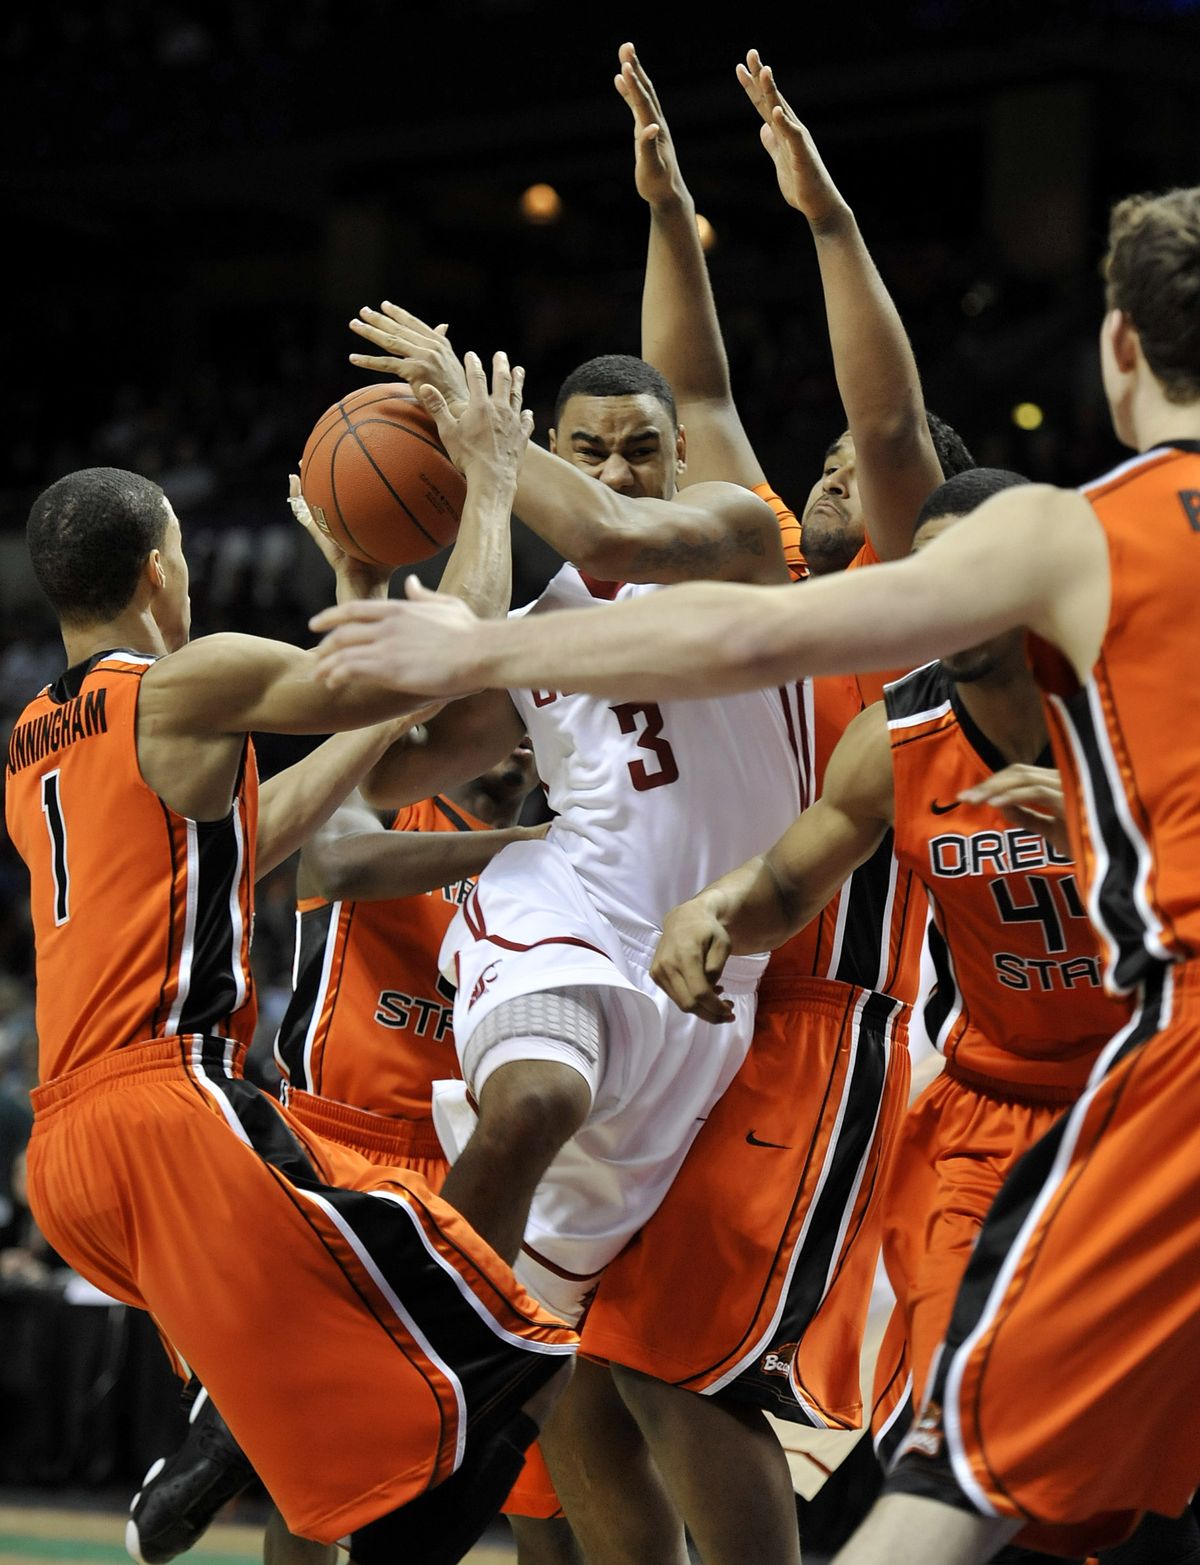 WSU’s DaVonte Lacy is surrounded by a colony of Beavers during first-half action at the Arena on Saturday. (Dan Pelle)